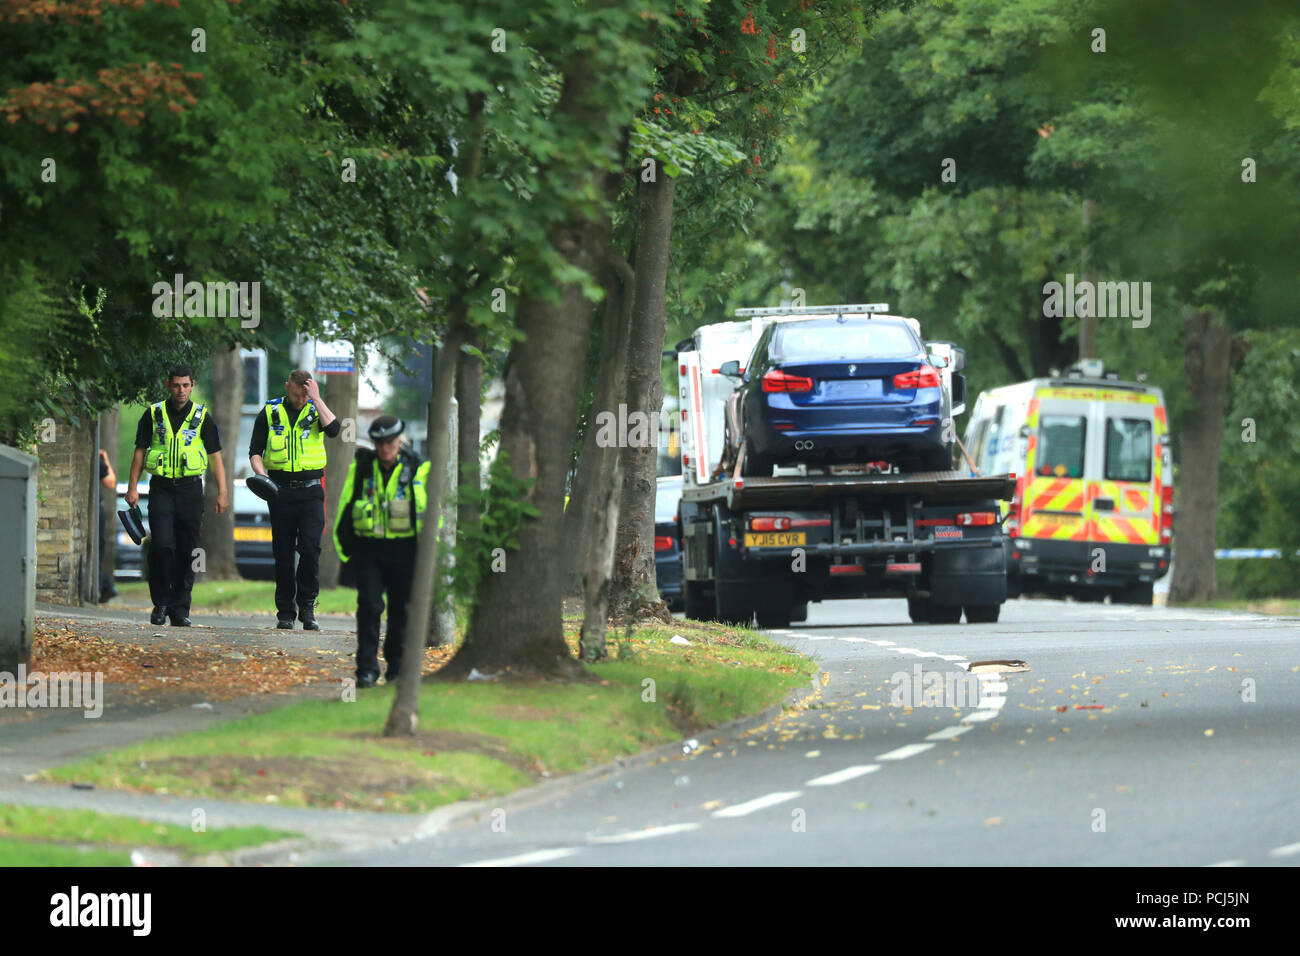 Police officers near the scene on Bingley Road at the junction with Toller Lane in Bradford following a road traffic collision where four males died in a car which was being followed by an unmarked police vehicle when it crashed. Stock Photo